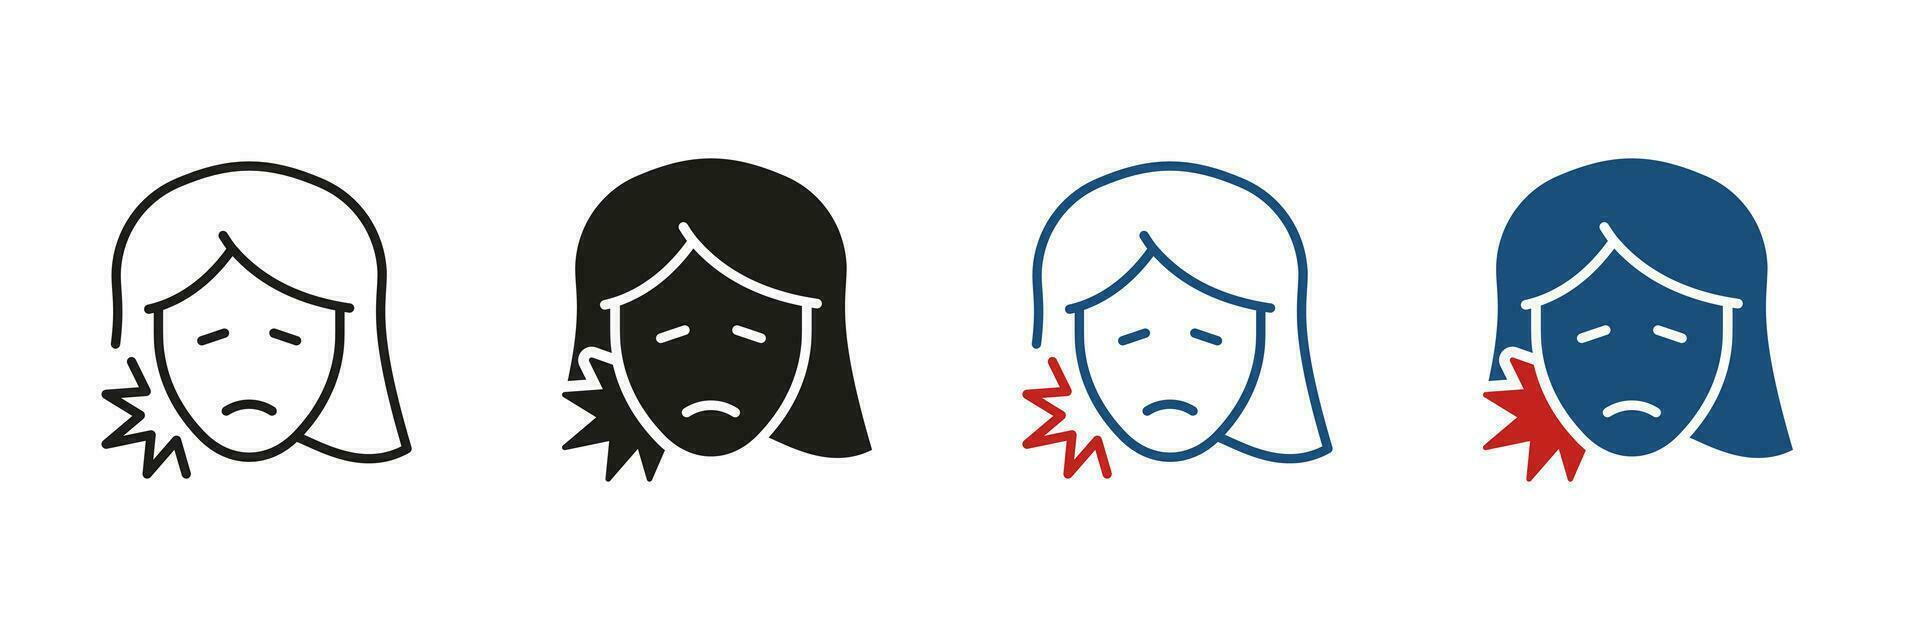 Human Oral Disease, Dentists Medical Treatment. Female Teeth Ache Silhouette and Line Icon Set. Toothache Symbol. Woman with Dental Pain Pictogram Collection. Isolated Vector Illustration.